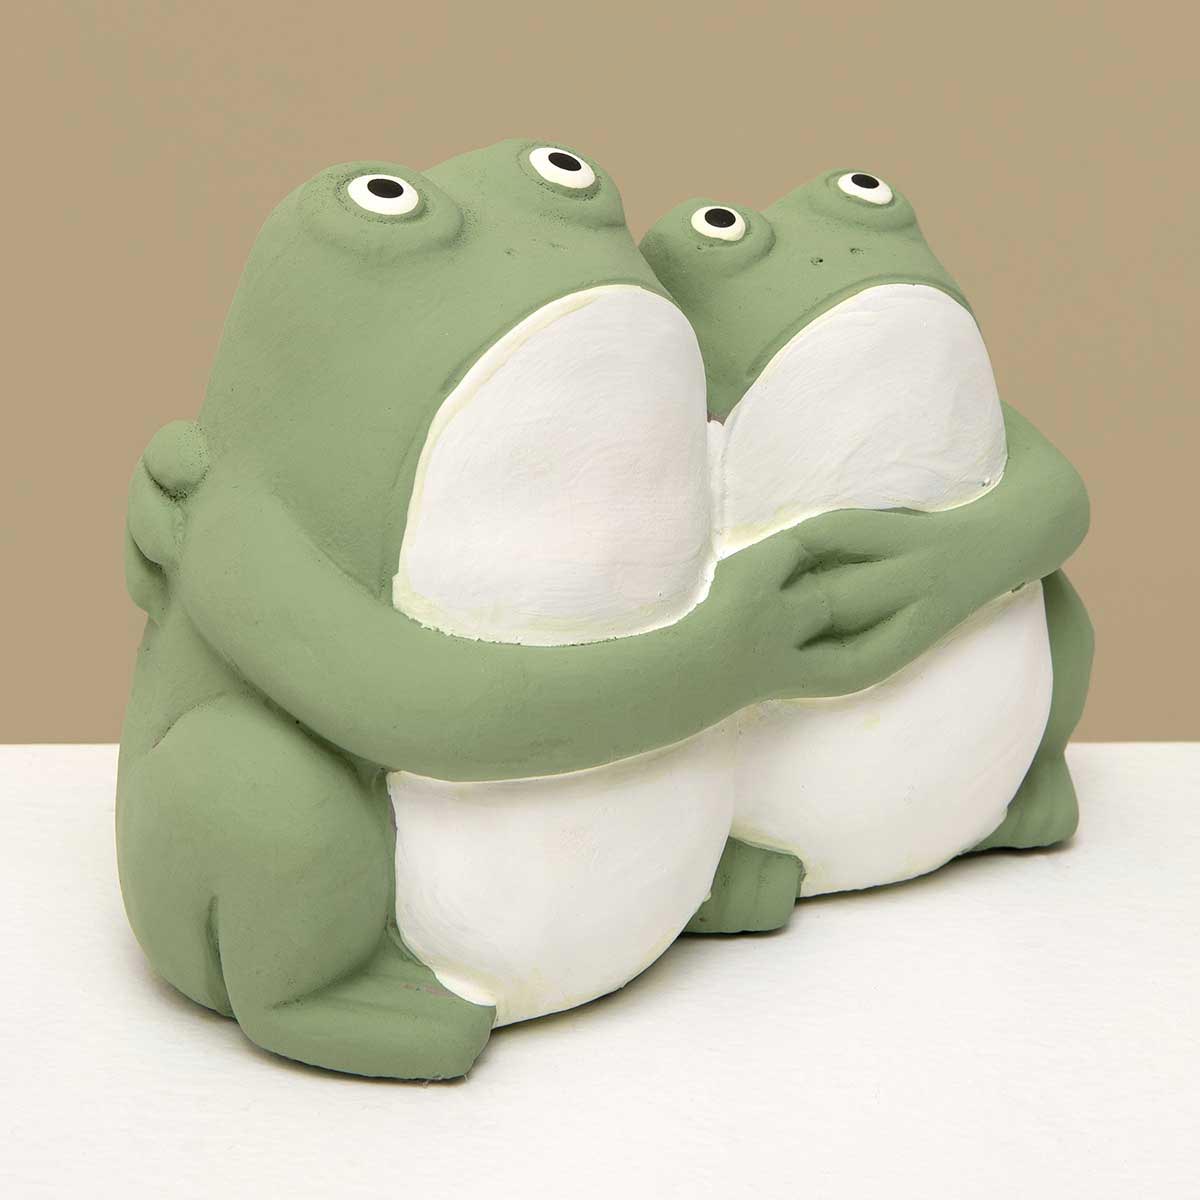 HUGGING FROGS 5.75IN X 3.25IN X 4.25IN GREEN/WHITE CONCRETE - Click Image to Close